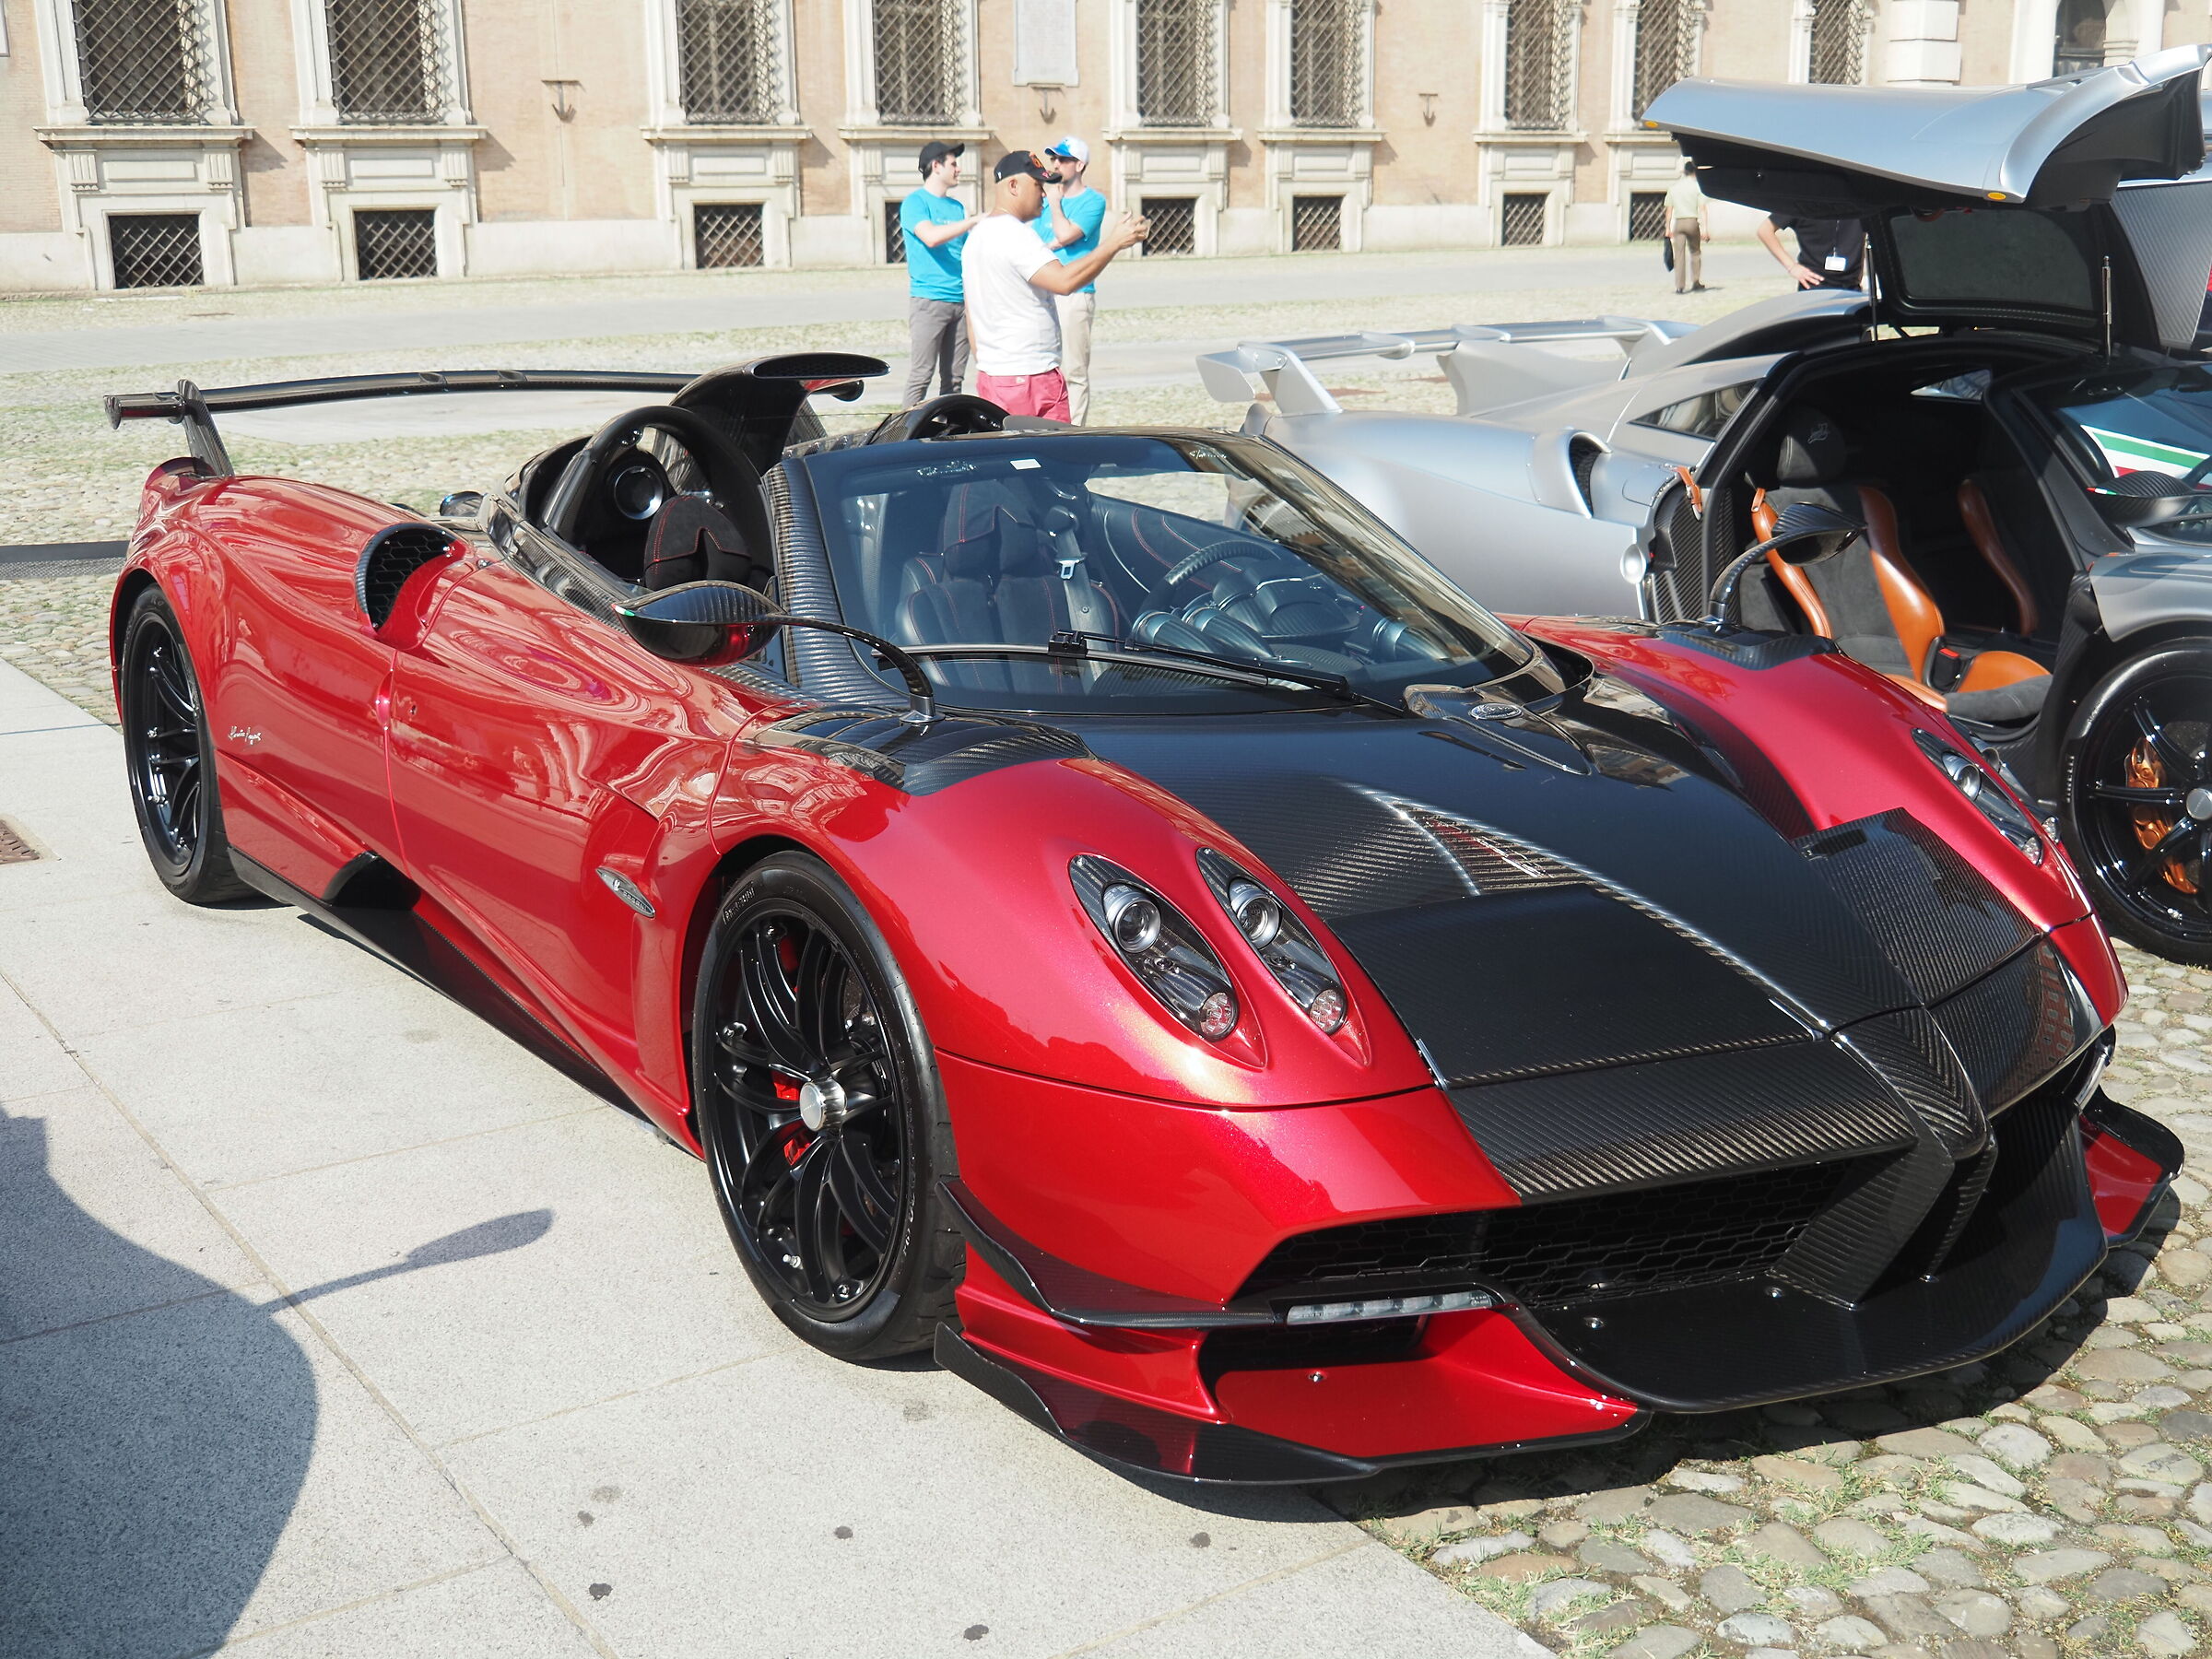 When the Pagani 4 is celebrated in Modena...